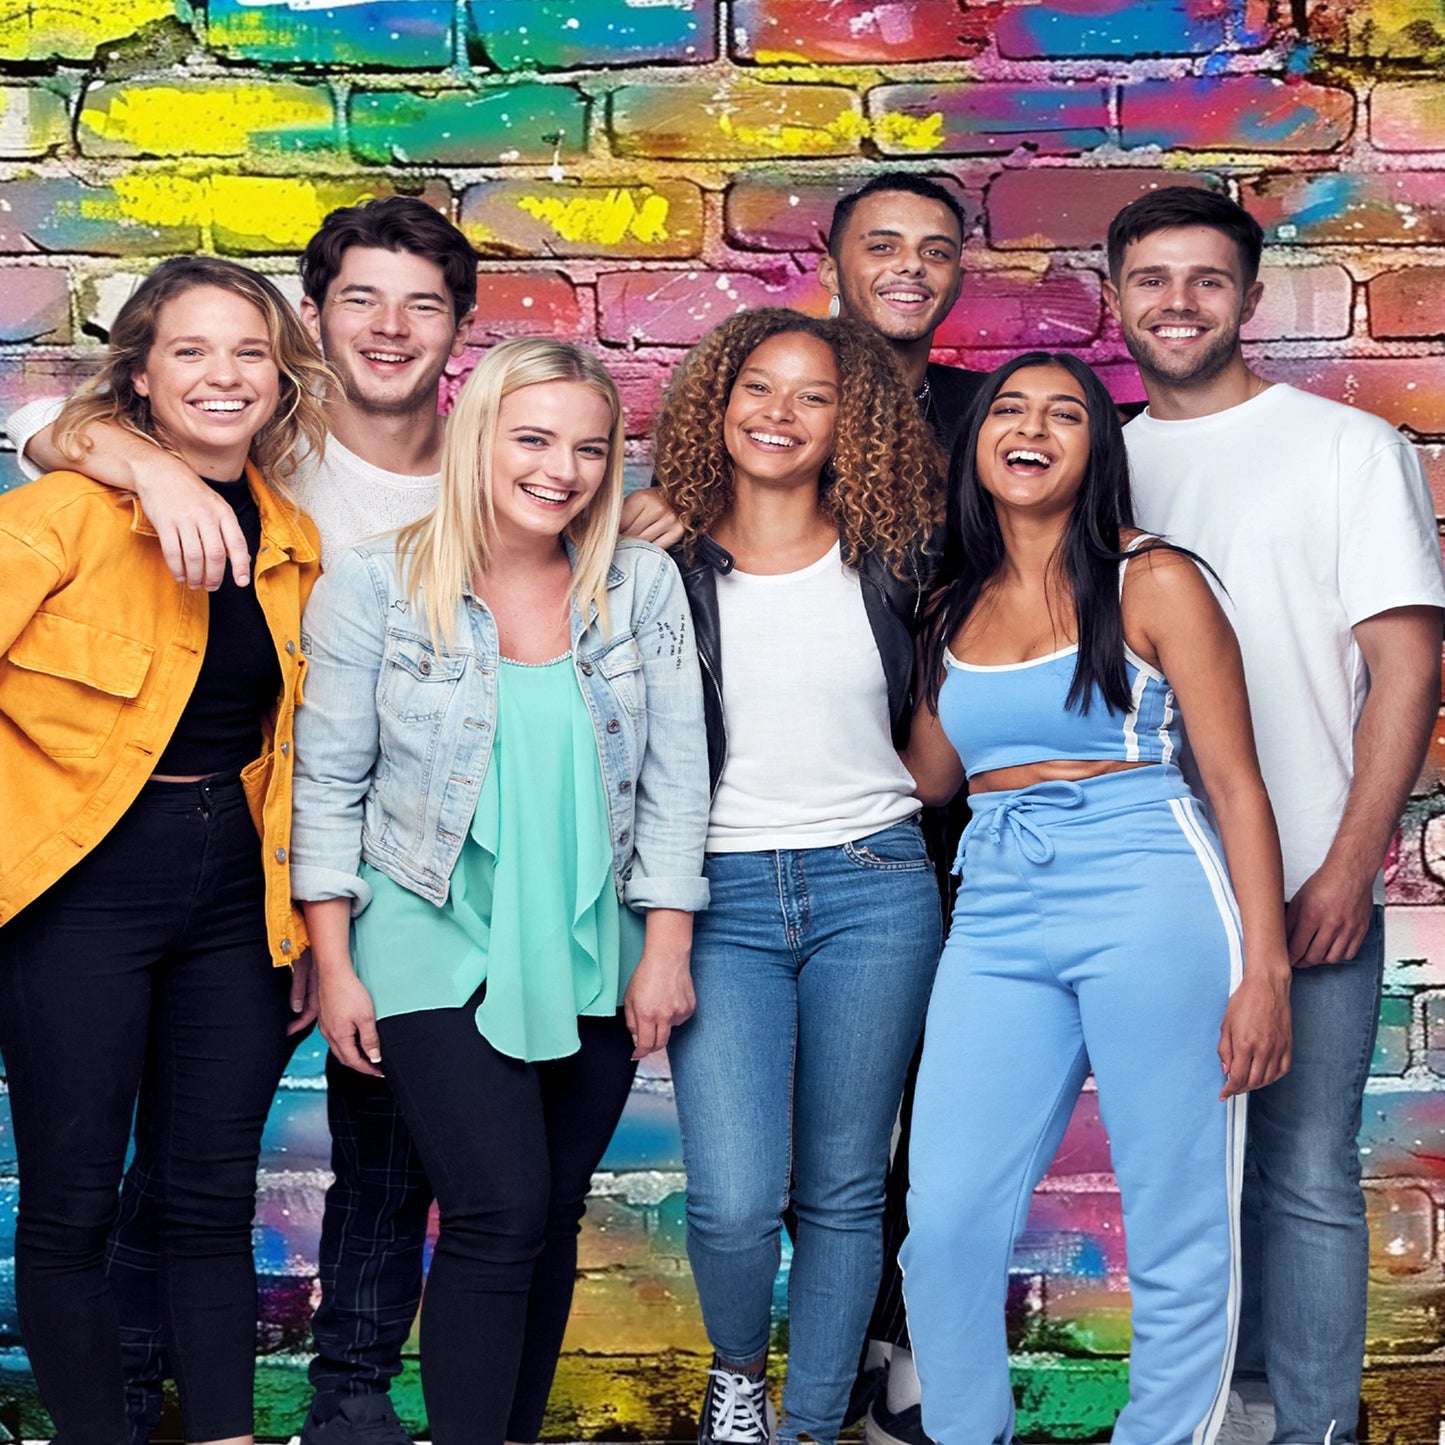 A group of six people stands close together and smiles in front of a colorful, graffiti-covered brick wall backdrop 7x5ft Fabric Graffiti Brick Wall Backdrop for Photography Hip Hop Disco Background Party Banner Portraits Photoshoot Props by ideasbackdrop.